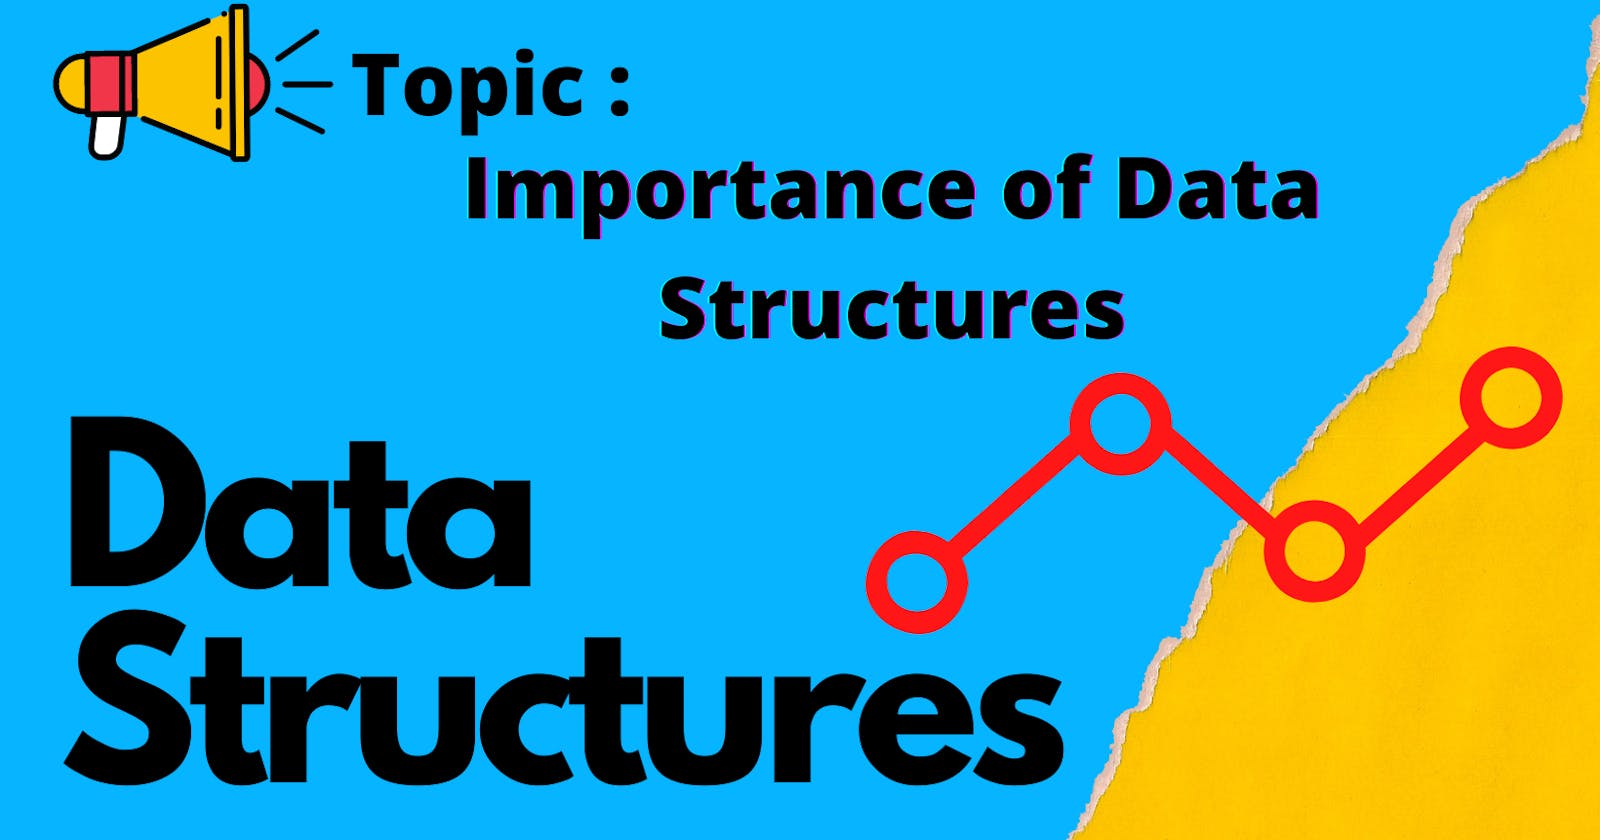 Importance of Data Structures